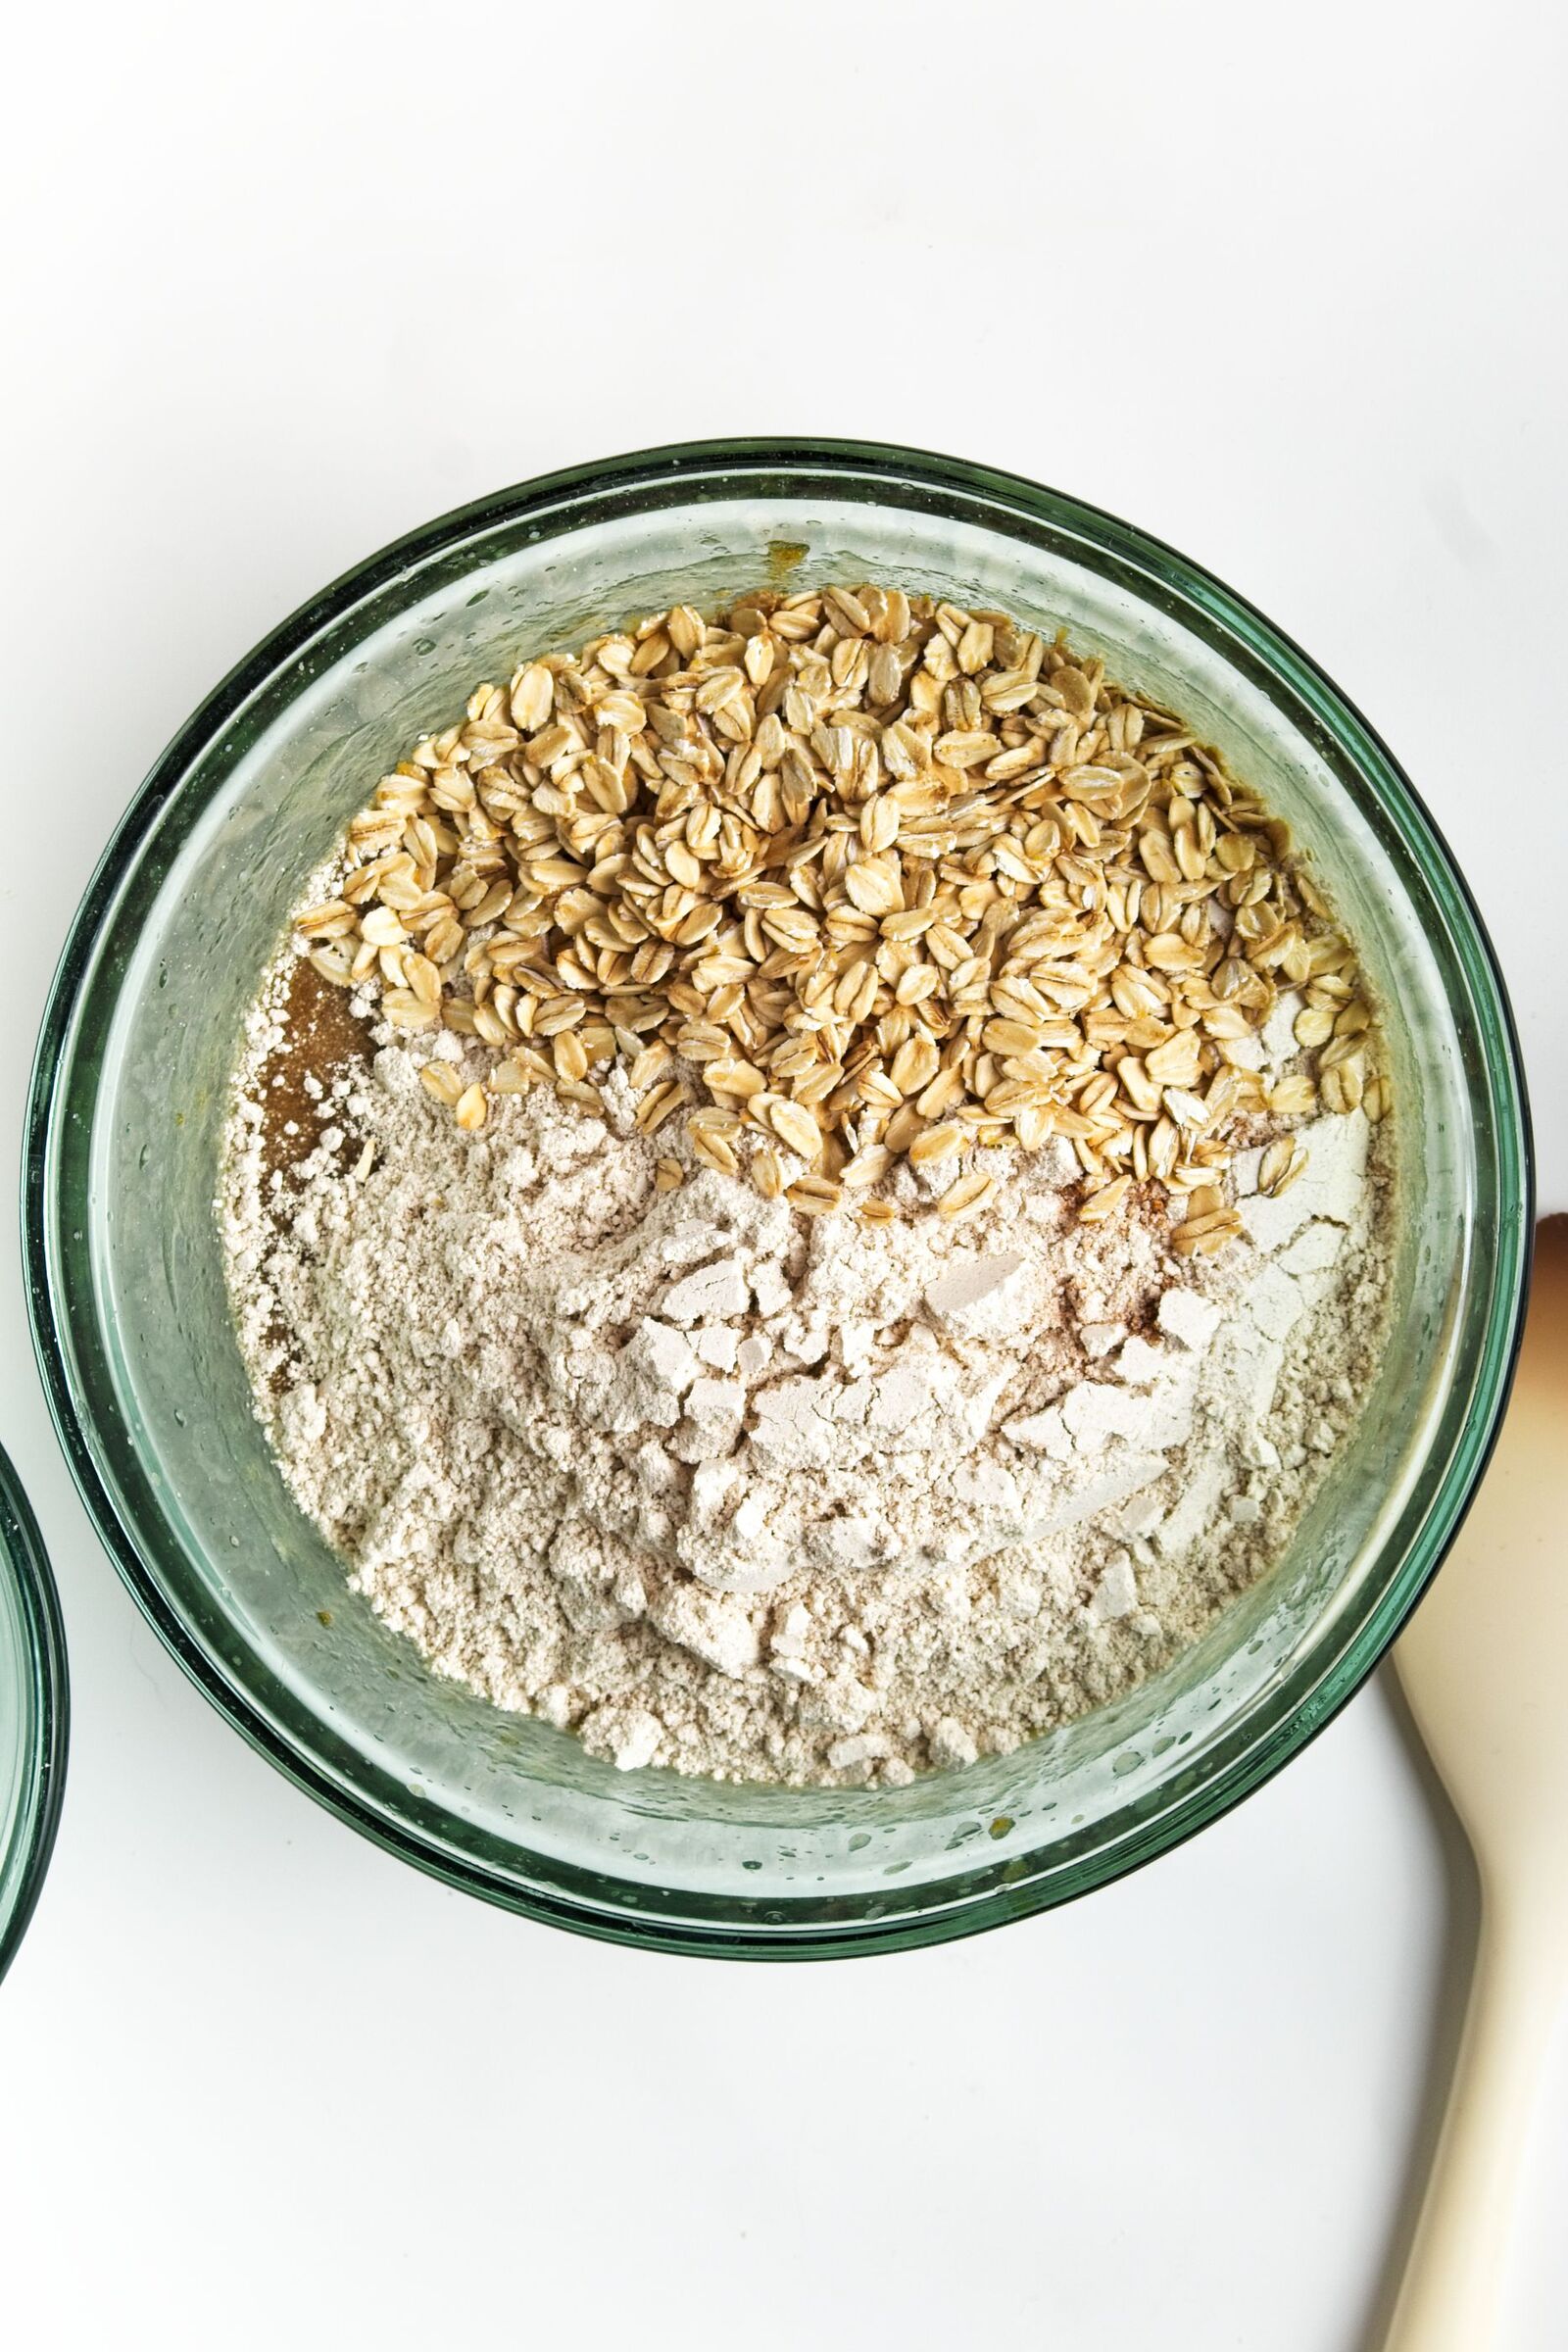 Oat Flour Banana Muffin ingredients in a bowl.